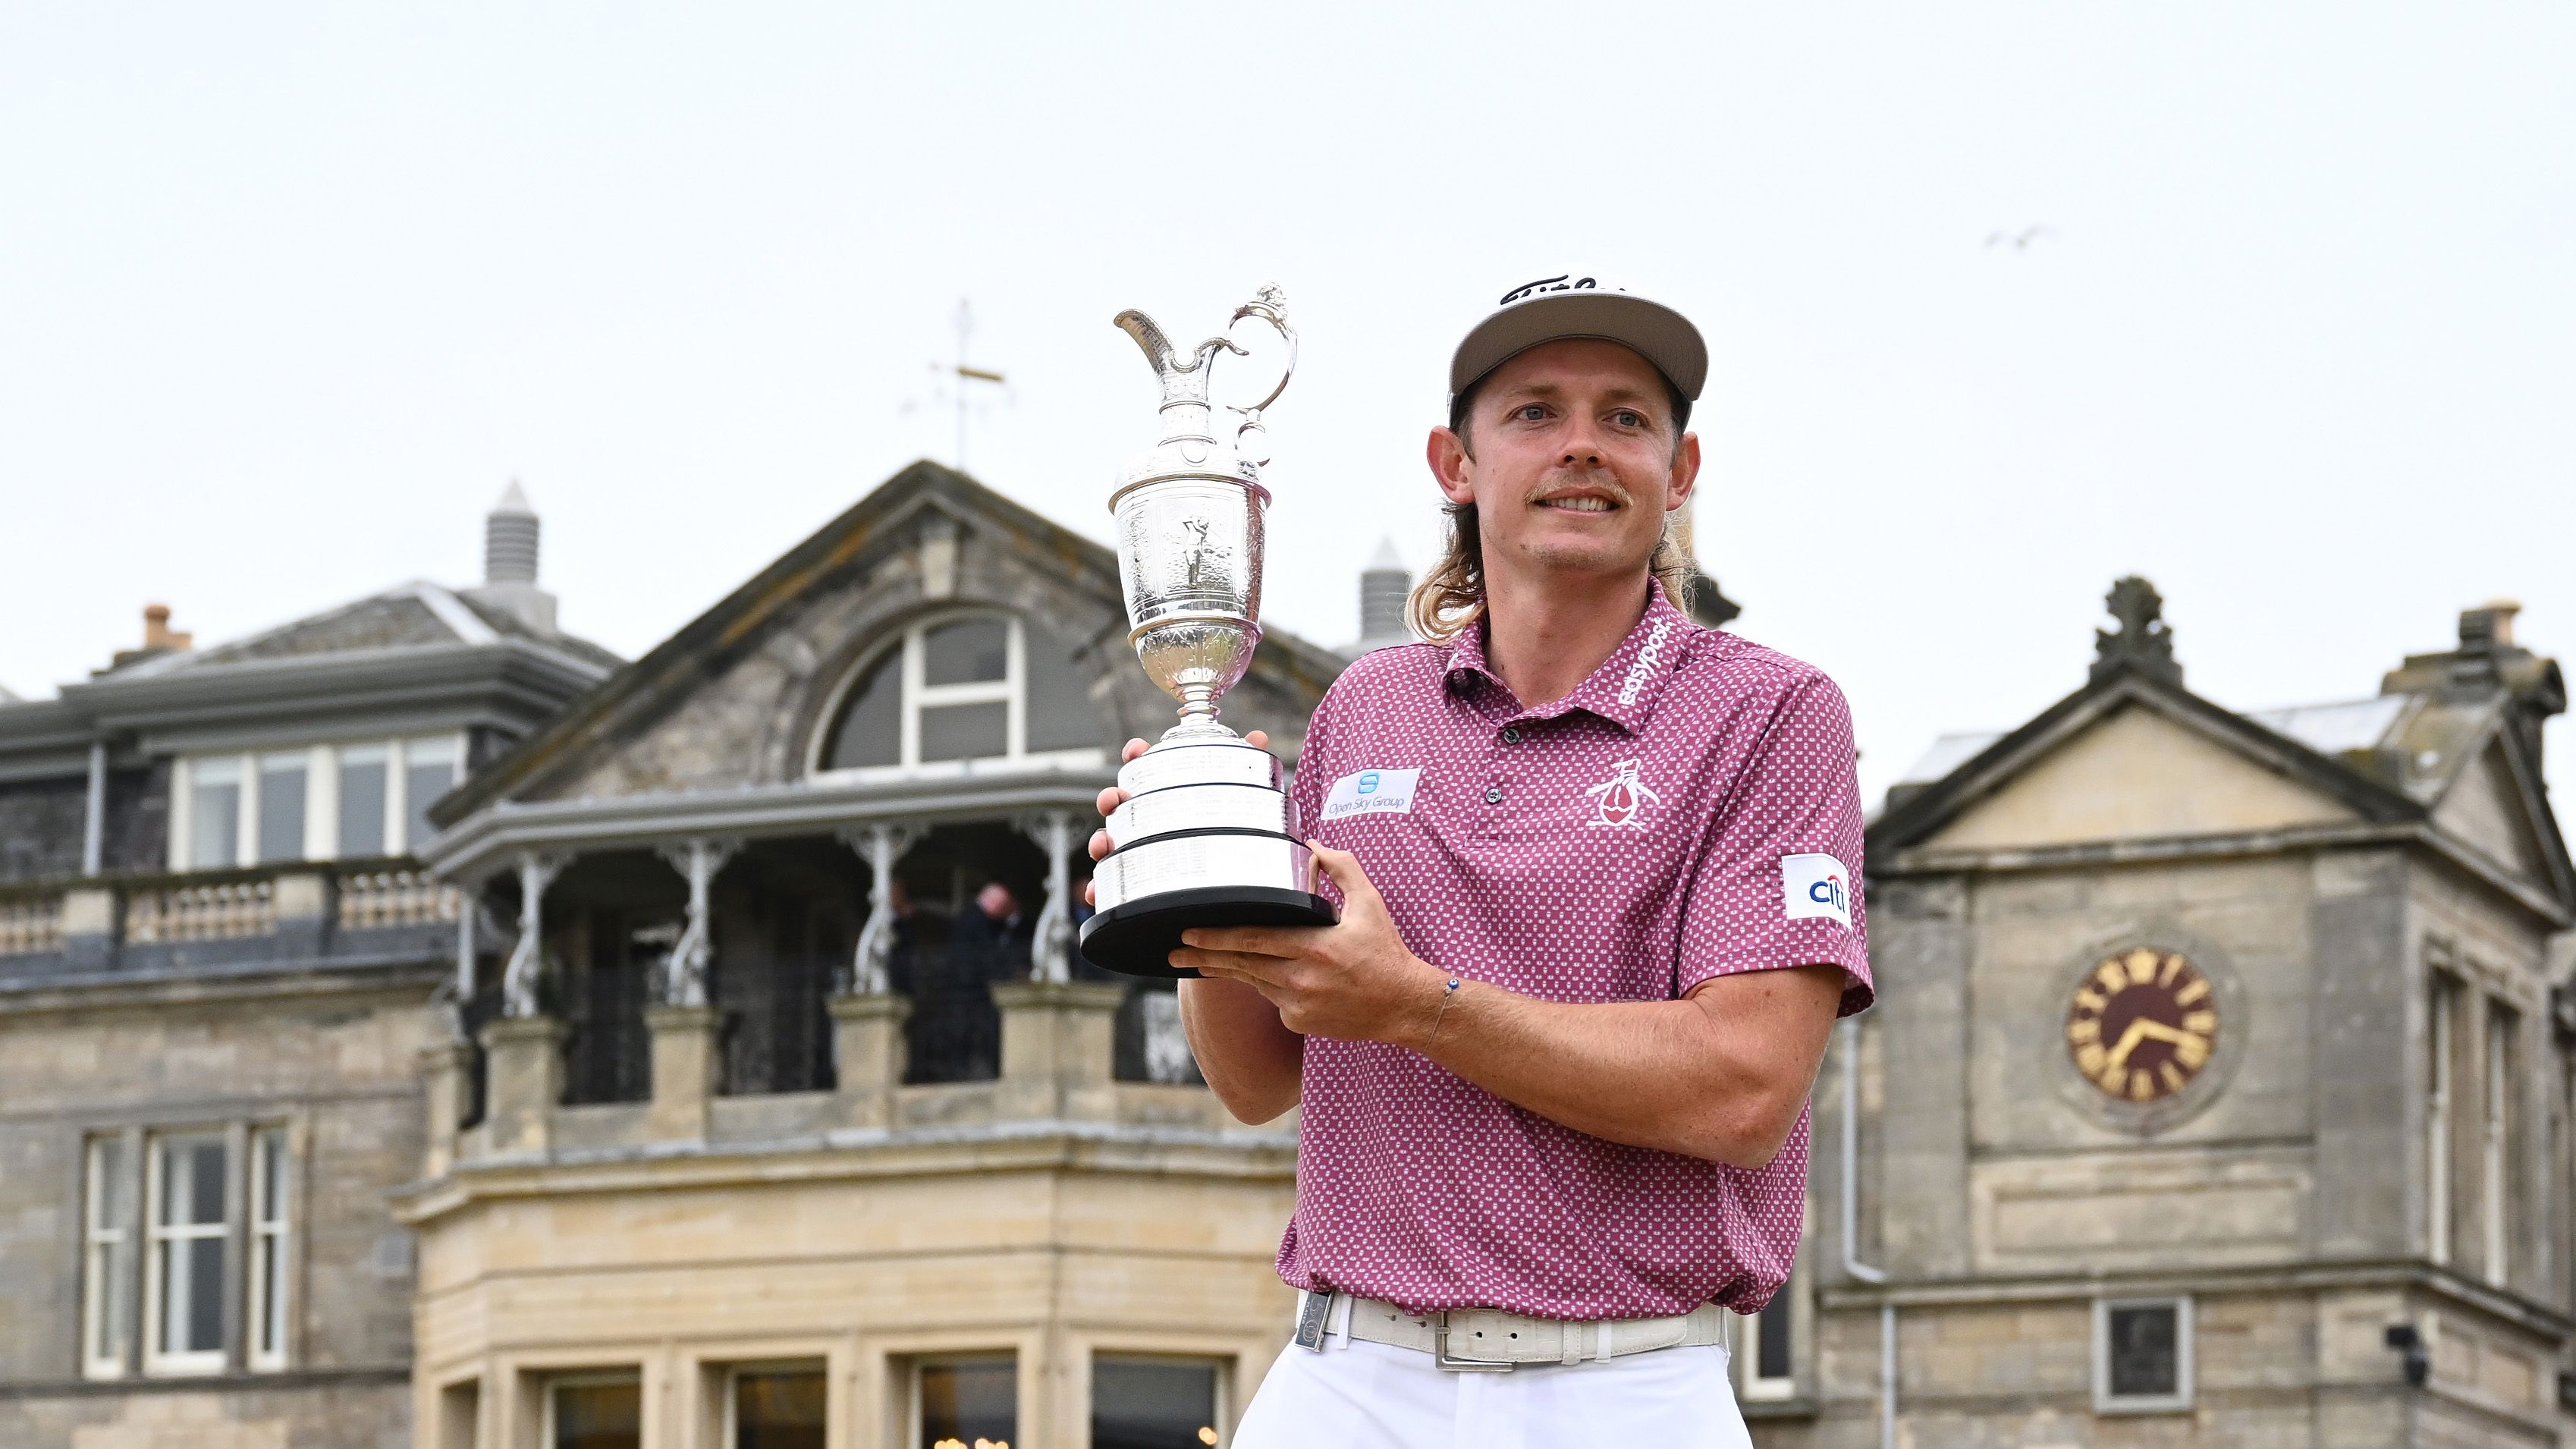 Cameron Smith with the Claret Jug in front of the Royal &amp; Ancient Clubhouse at St Andrews.